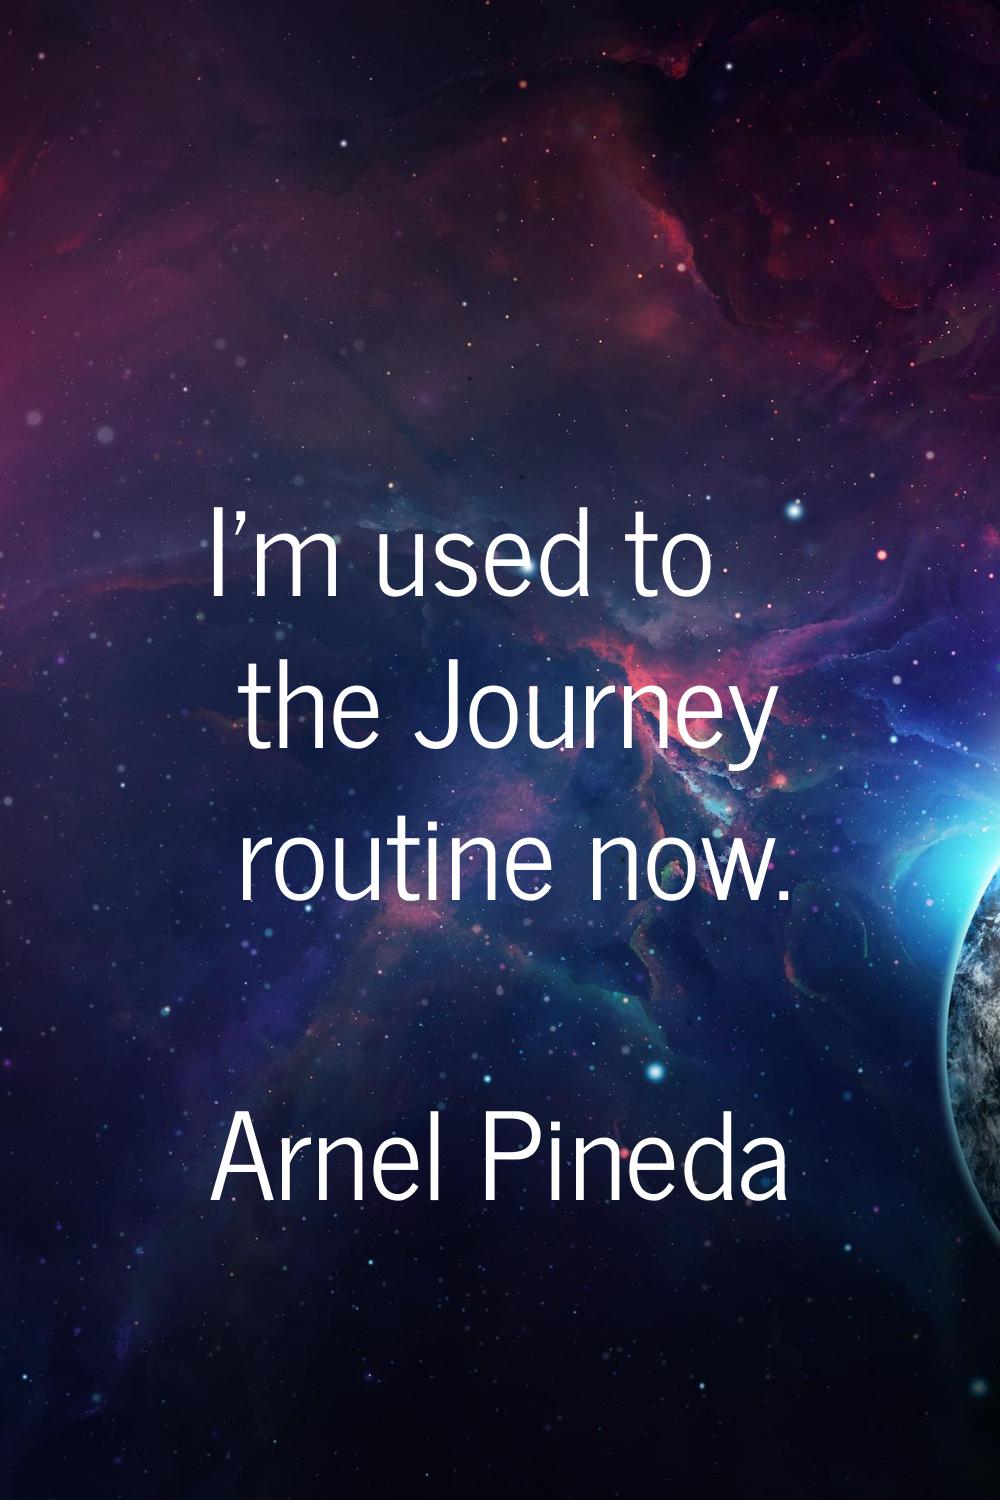 I'm used to the Journey routine now.